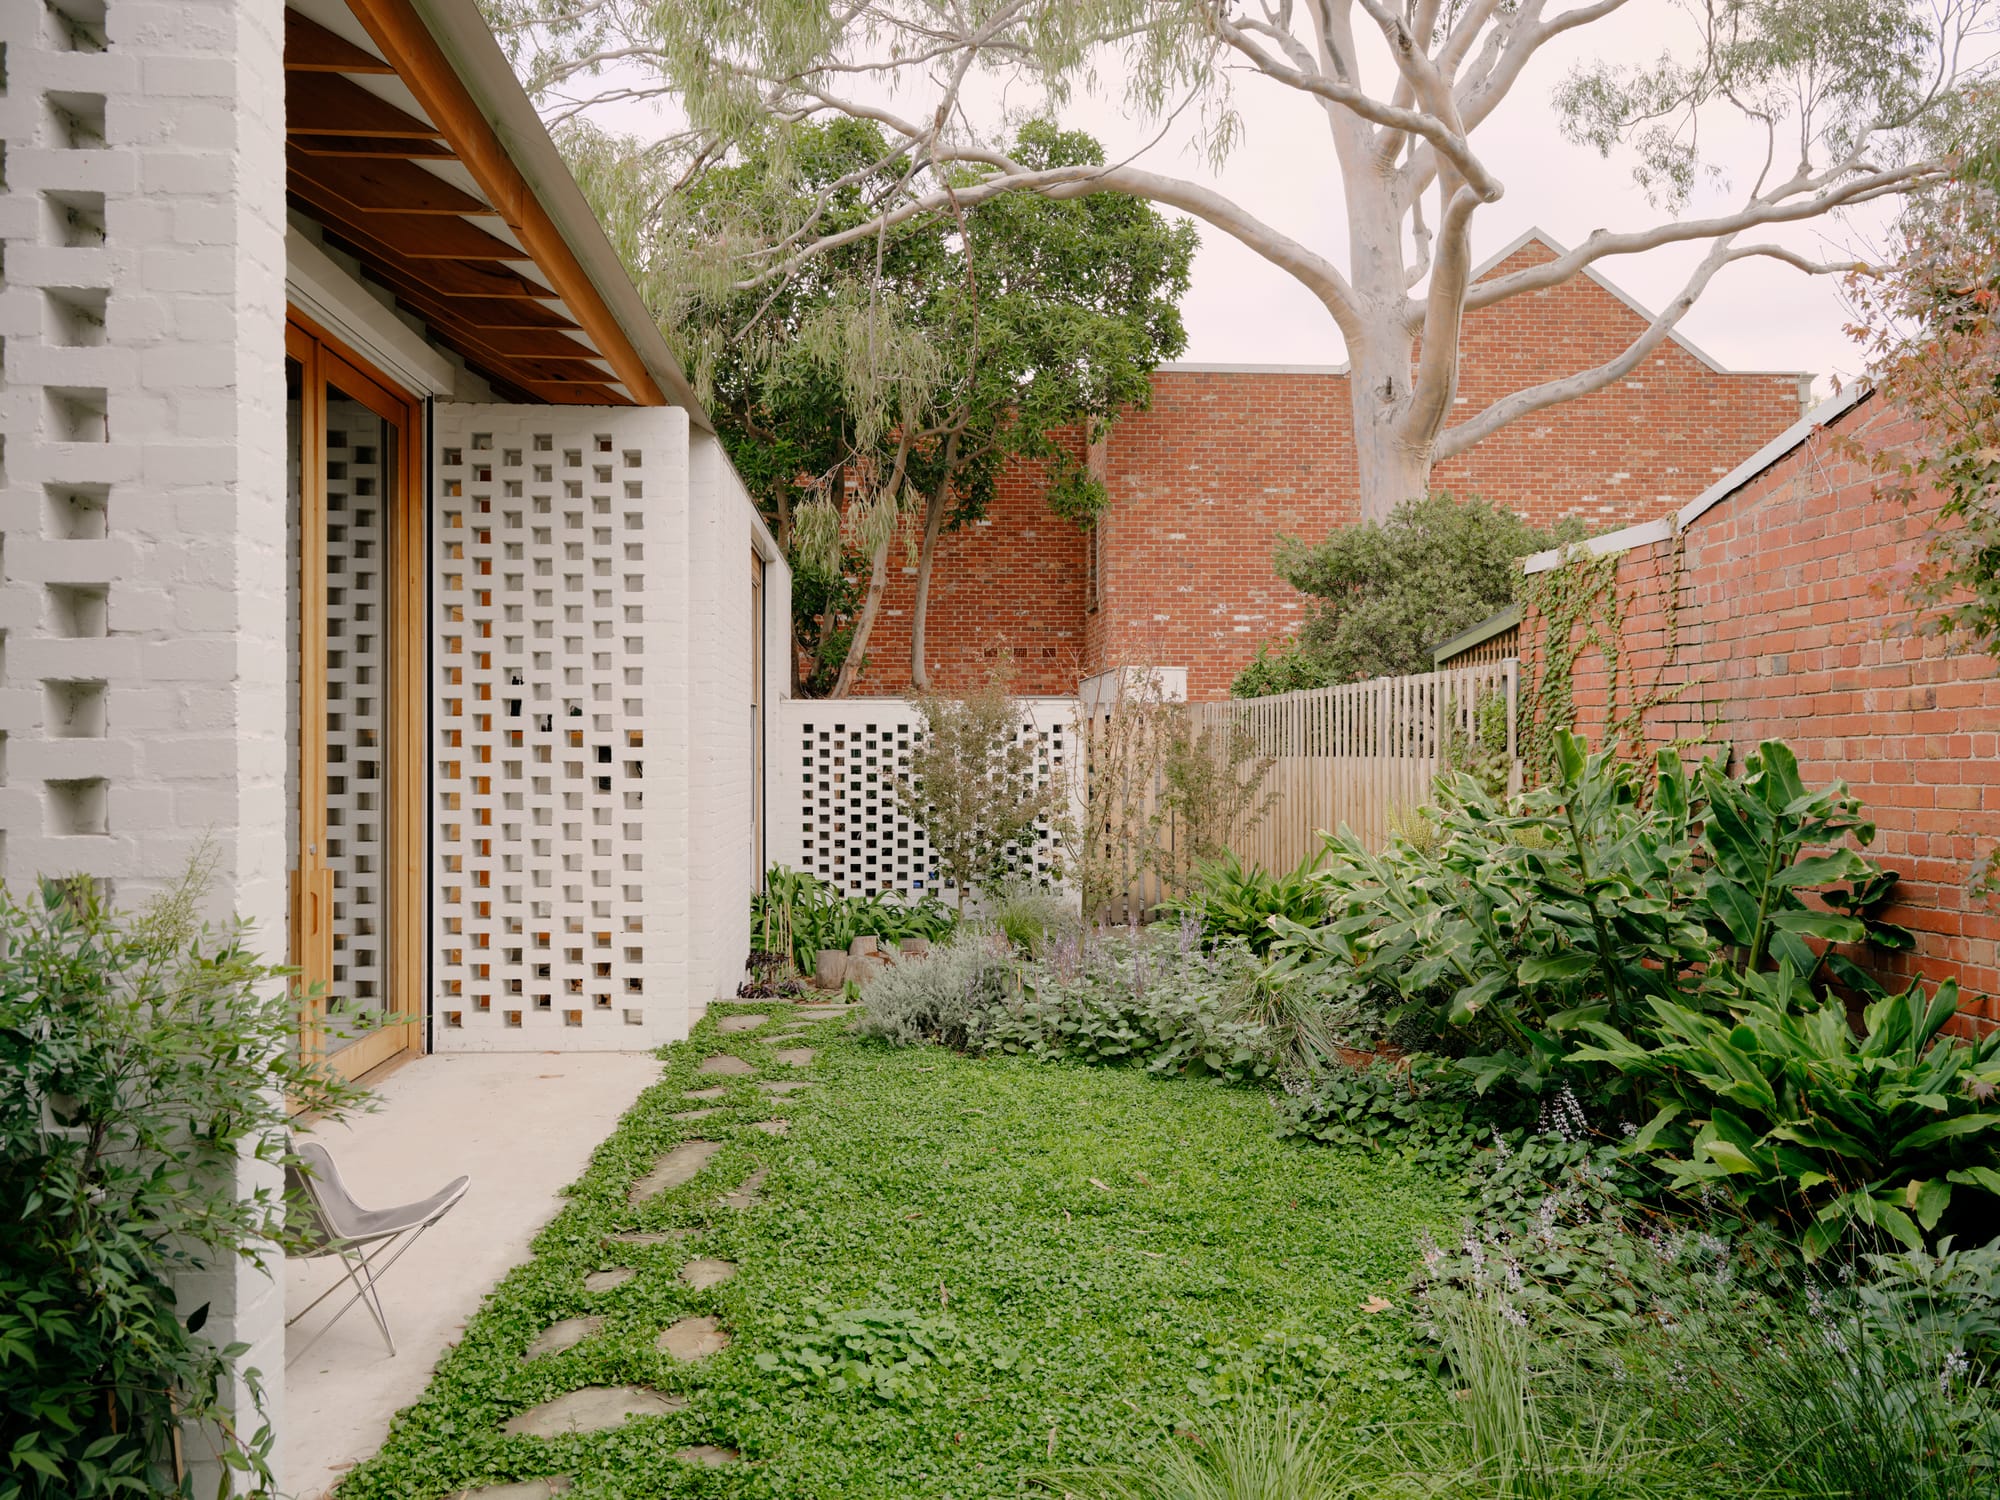 Corymbia by Karen Abernethy Architects. Photography by Tom Ross. Exterior facade of white brick home and adjoining garden. Green grass and wild shrubs to right of image. 